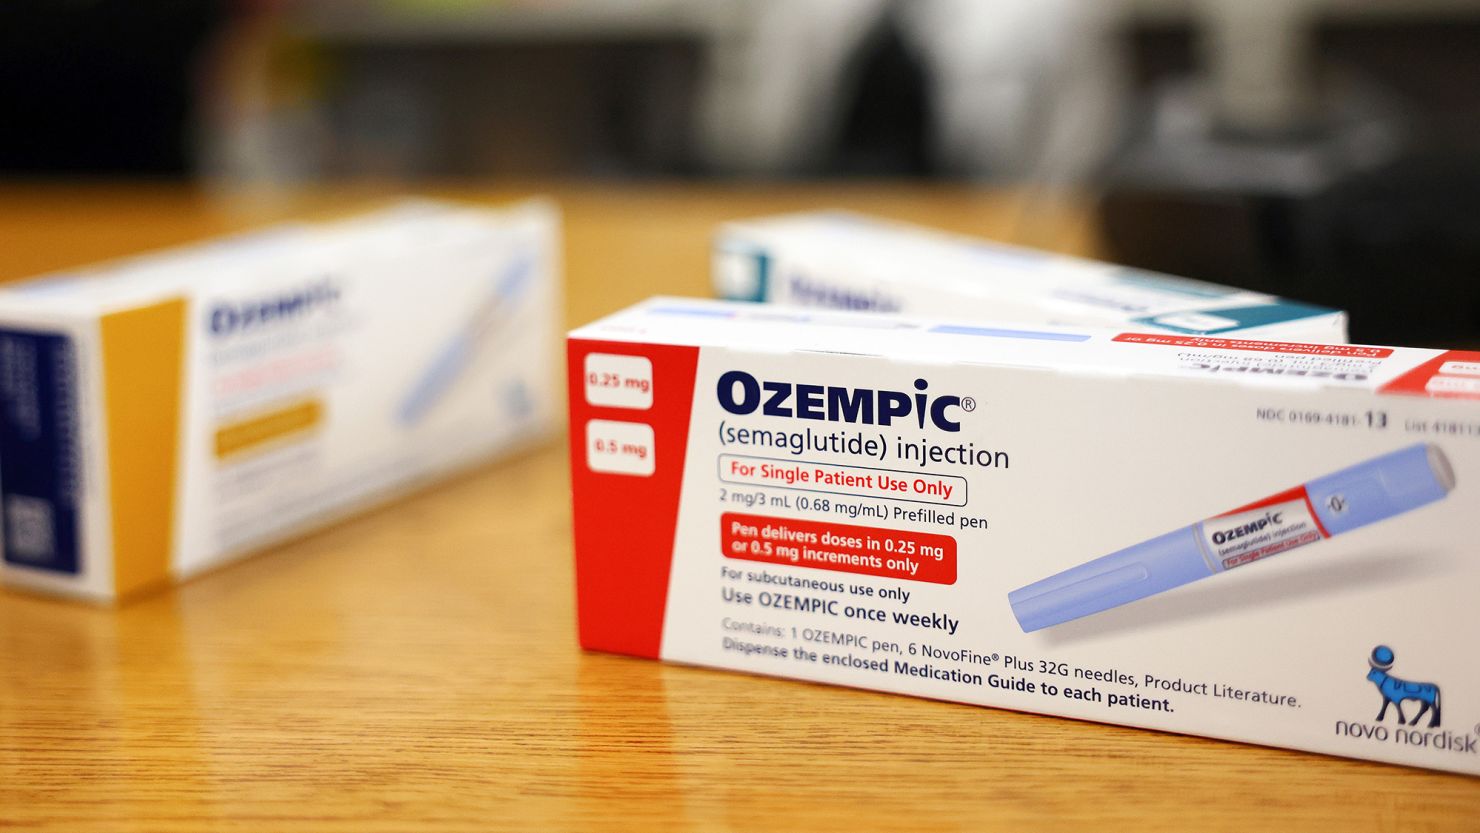 Costco and its low-cost health care partner Sesame have launched a weight loss program that includes prescriptions for medications like Ozempic, when appropriate.